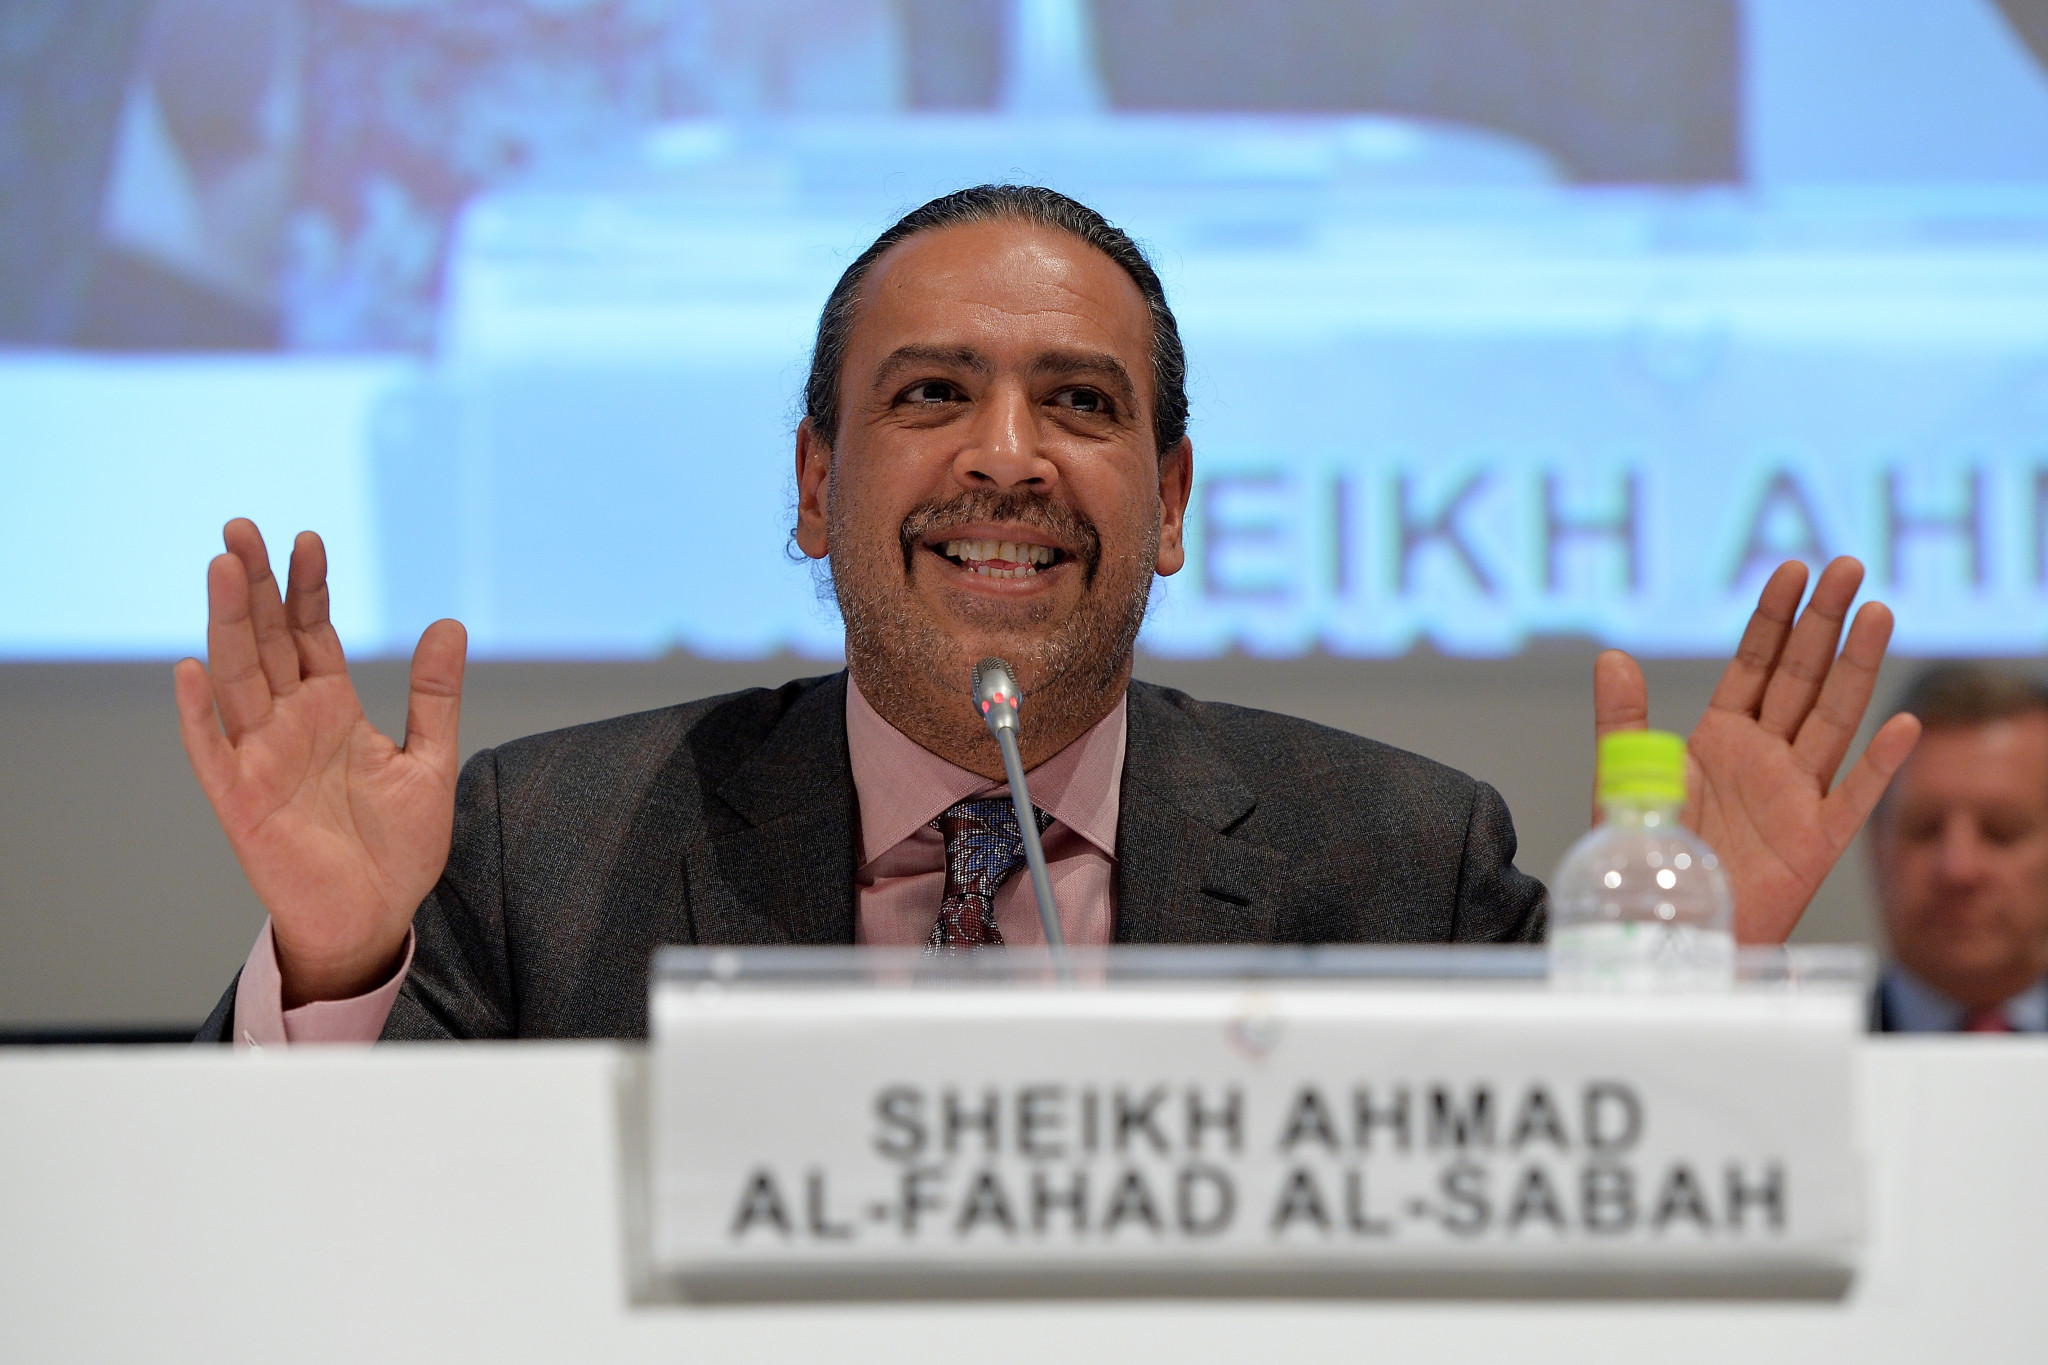 The ANOC General Assembly's focus was on Sheikh Ahmad, but several interesting topics emerged ©Getty Images